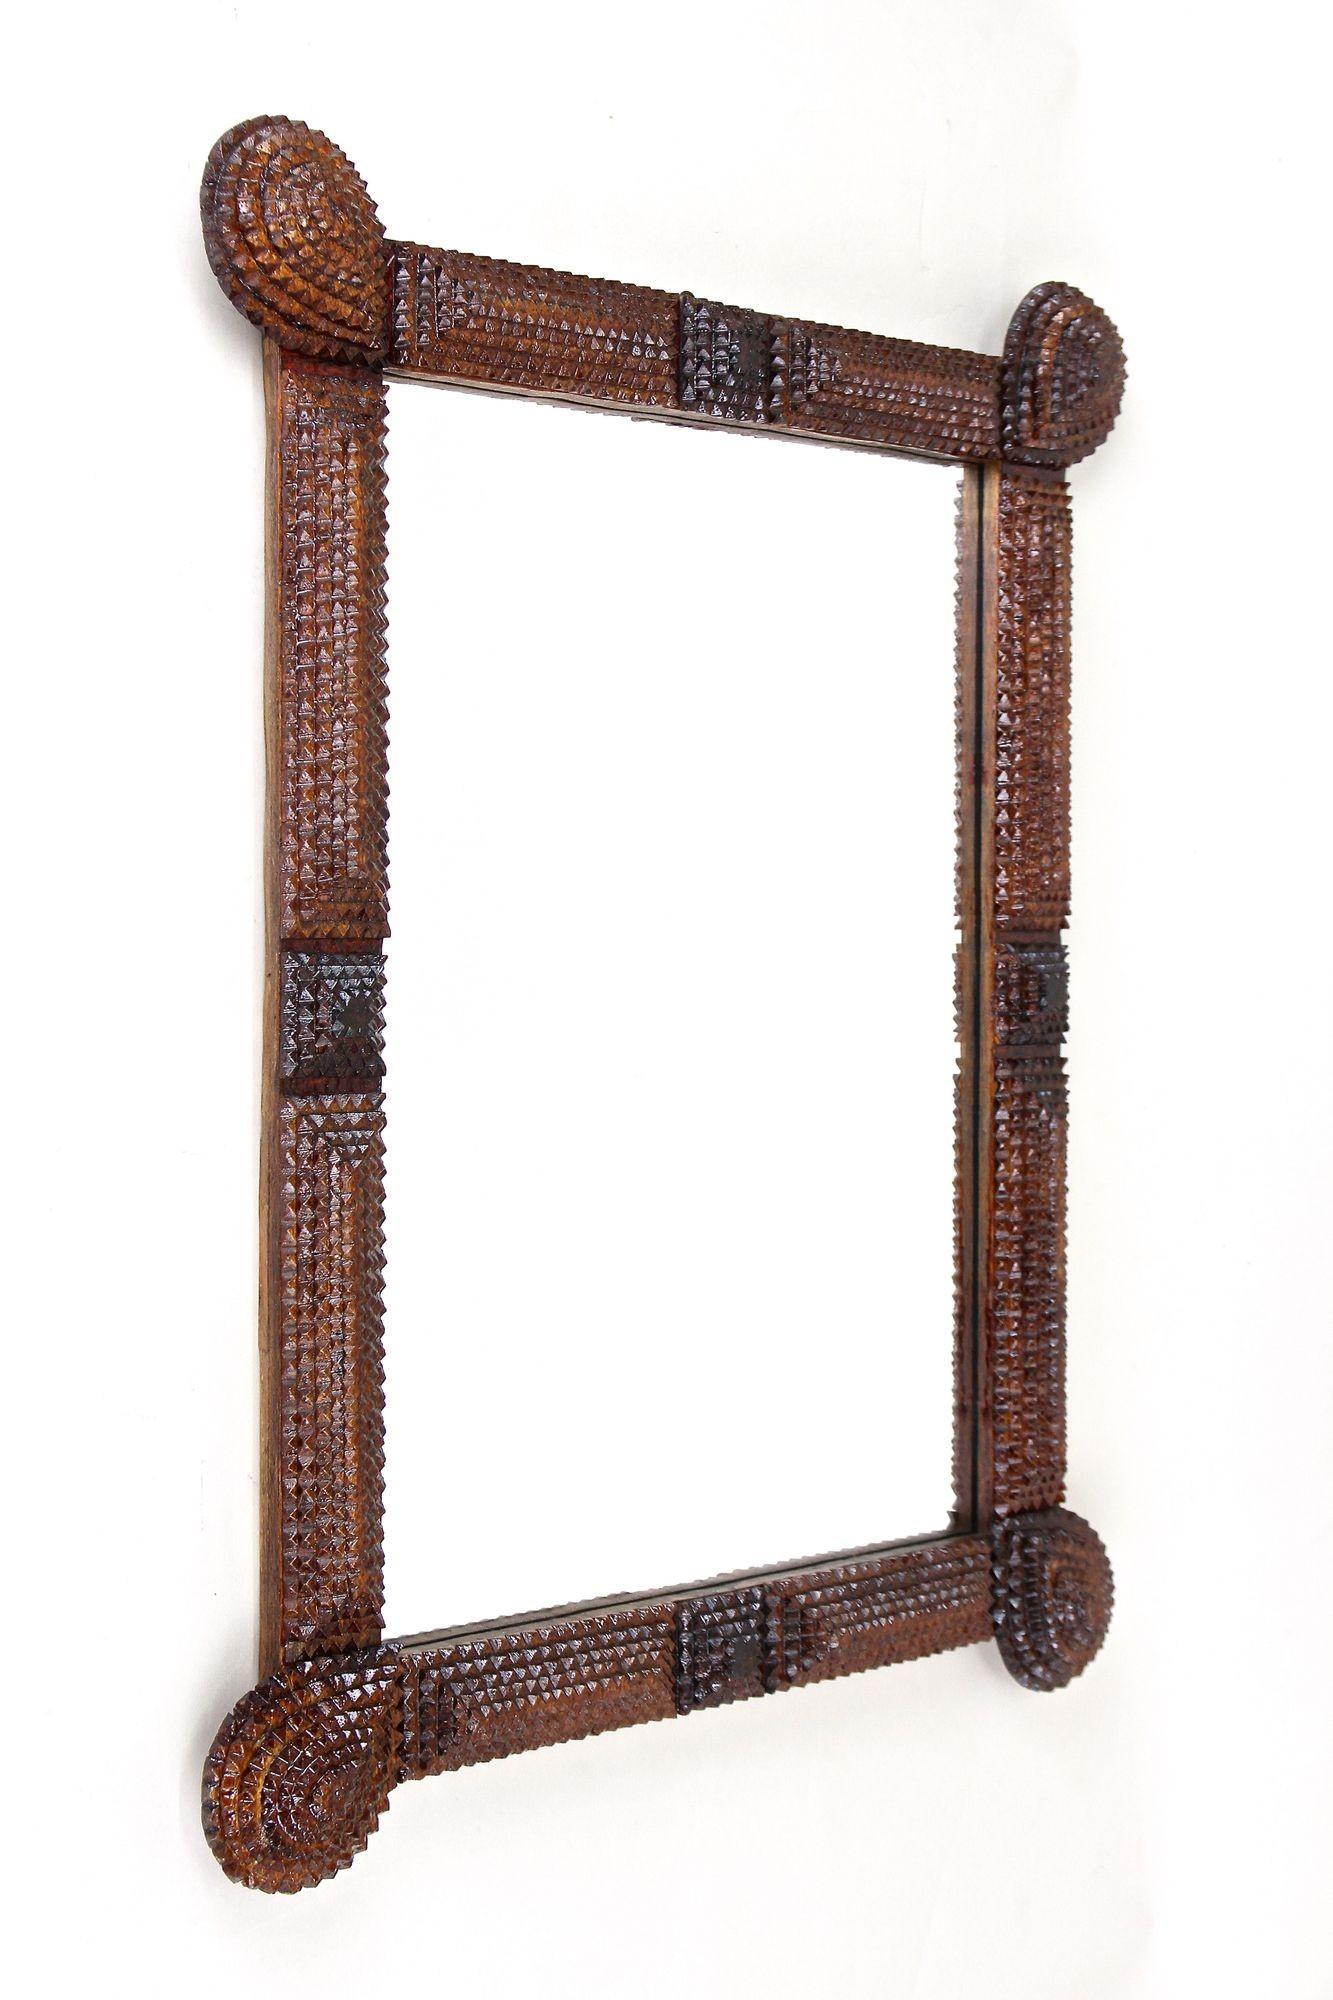 Extraordinary, unique rustic Tramp Art wall mirror out of Austria from the late 19th century around 1880. Artfully designed and handcarved out of basswood this very special Tramp Art work was crafted in the so called 